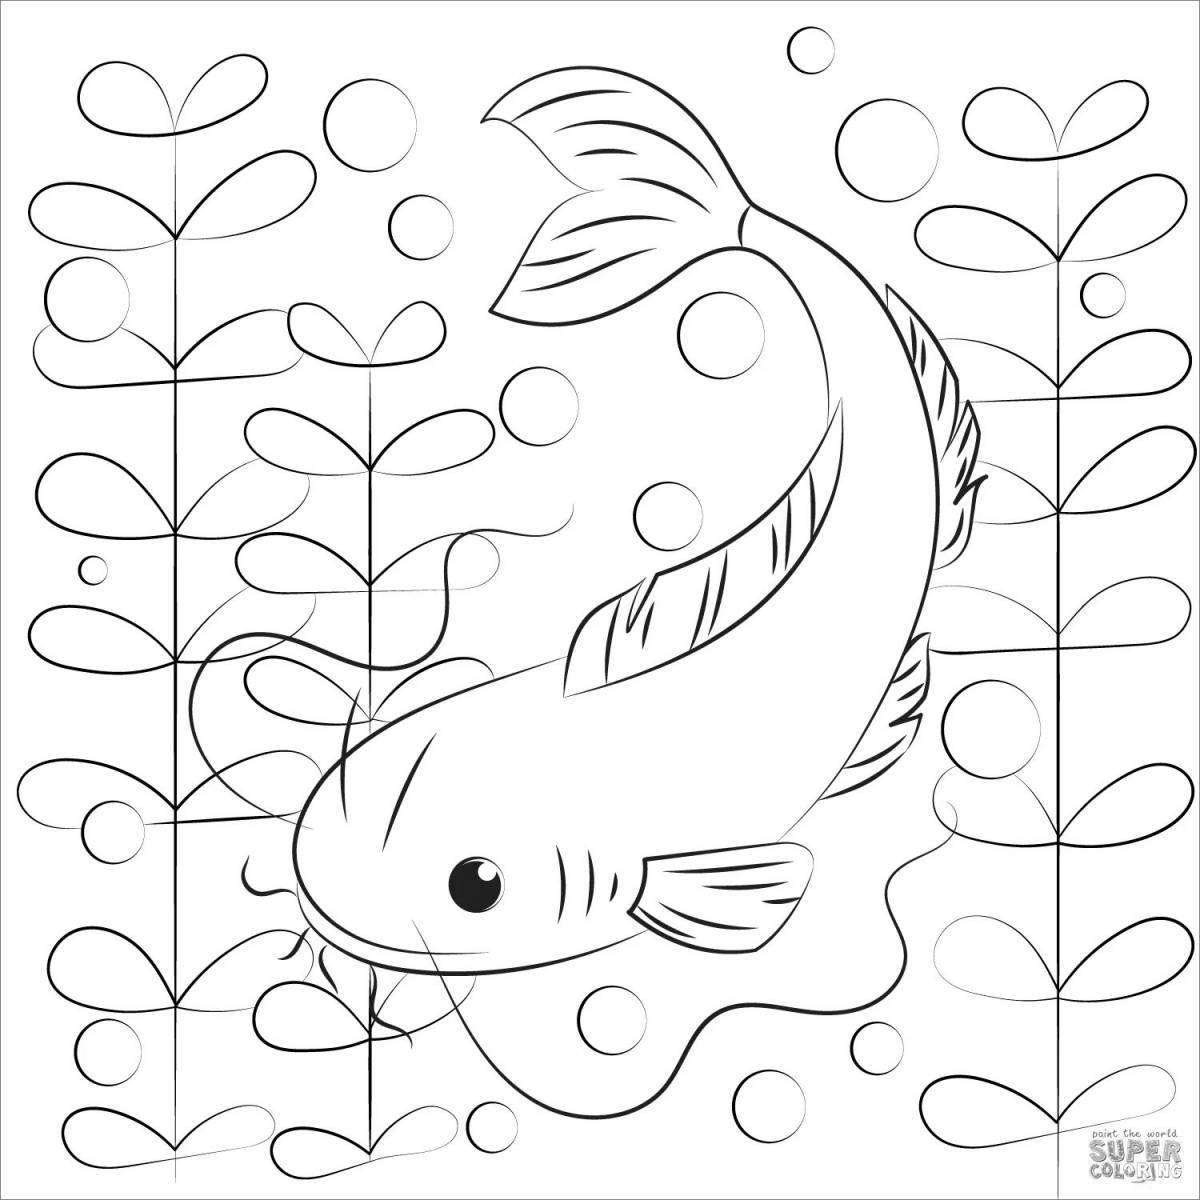 Coloring page happy catfish